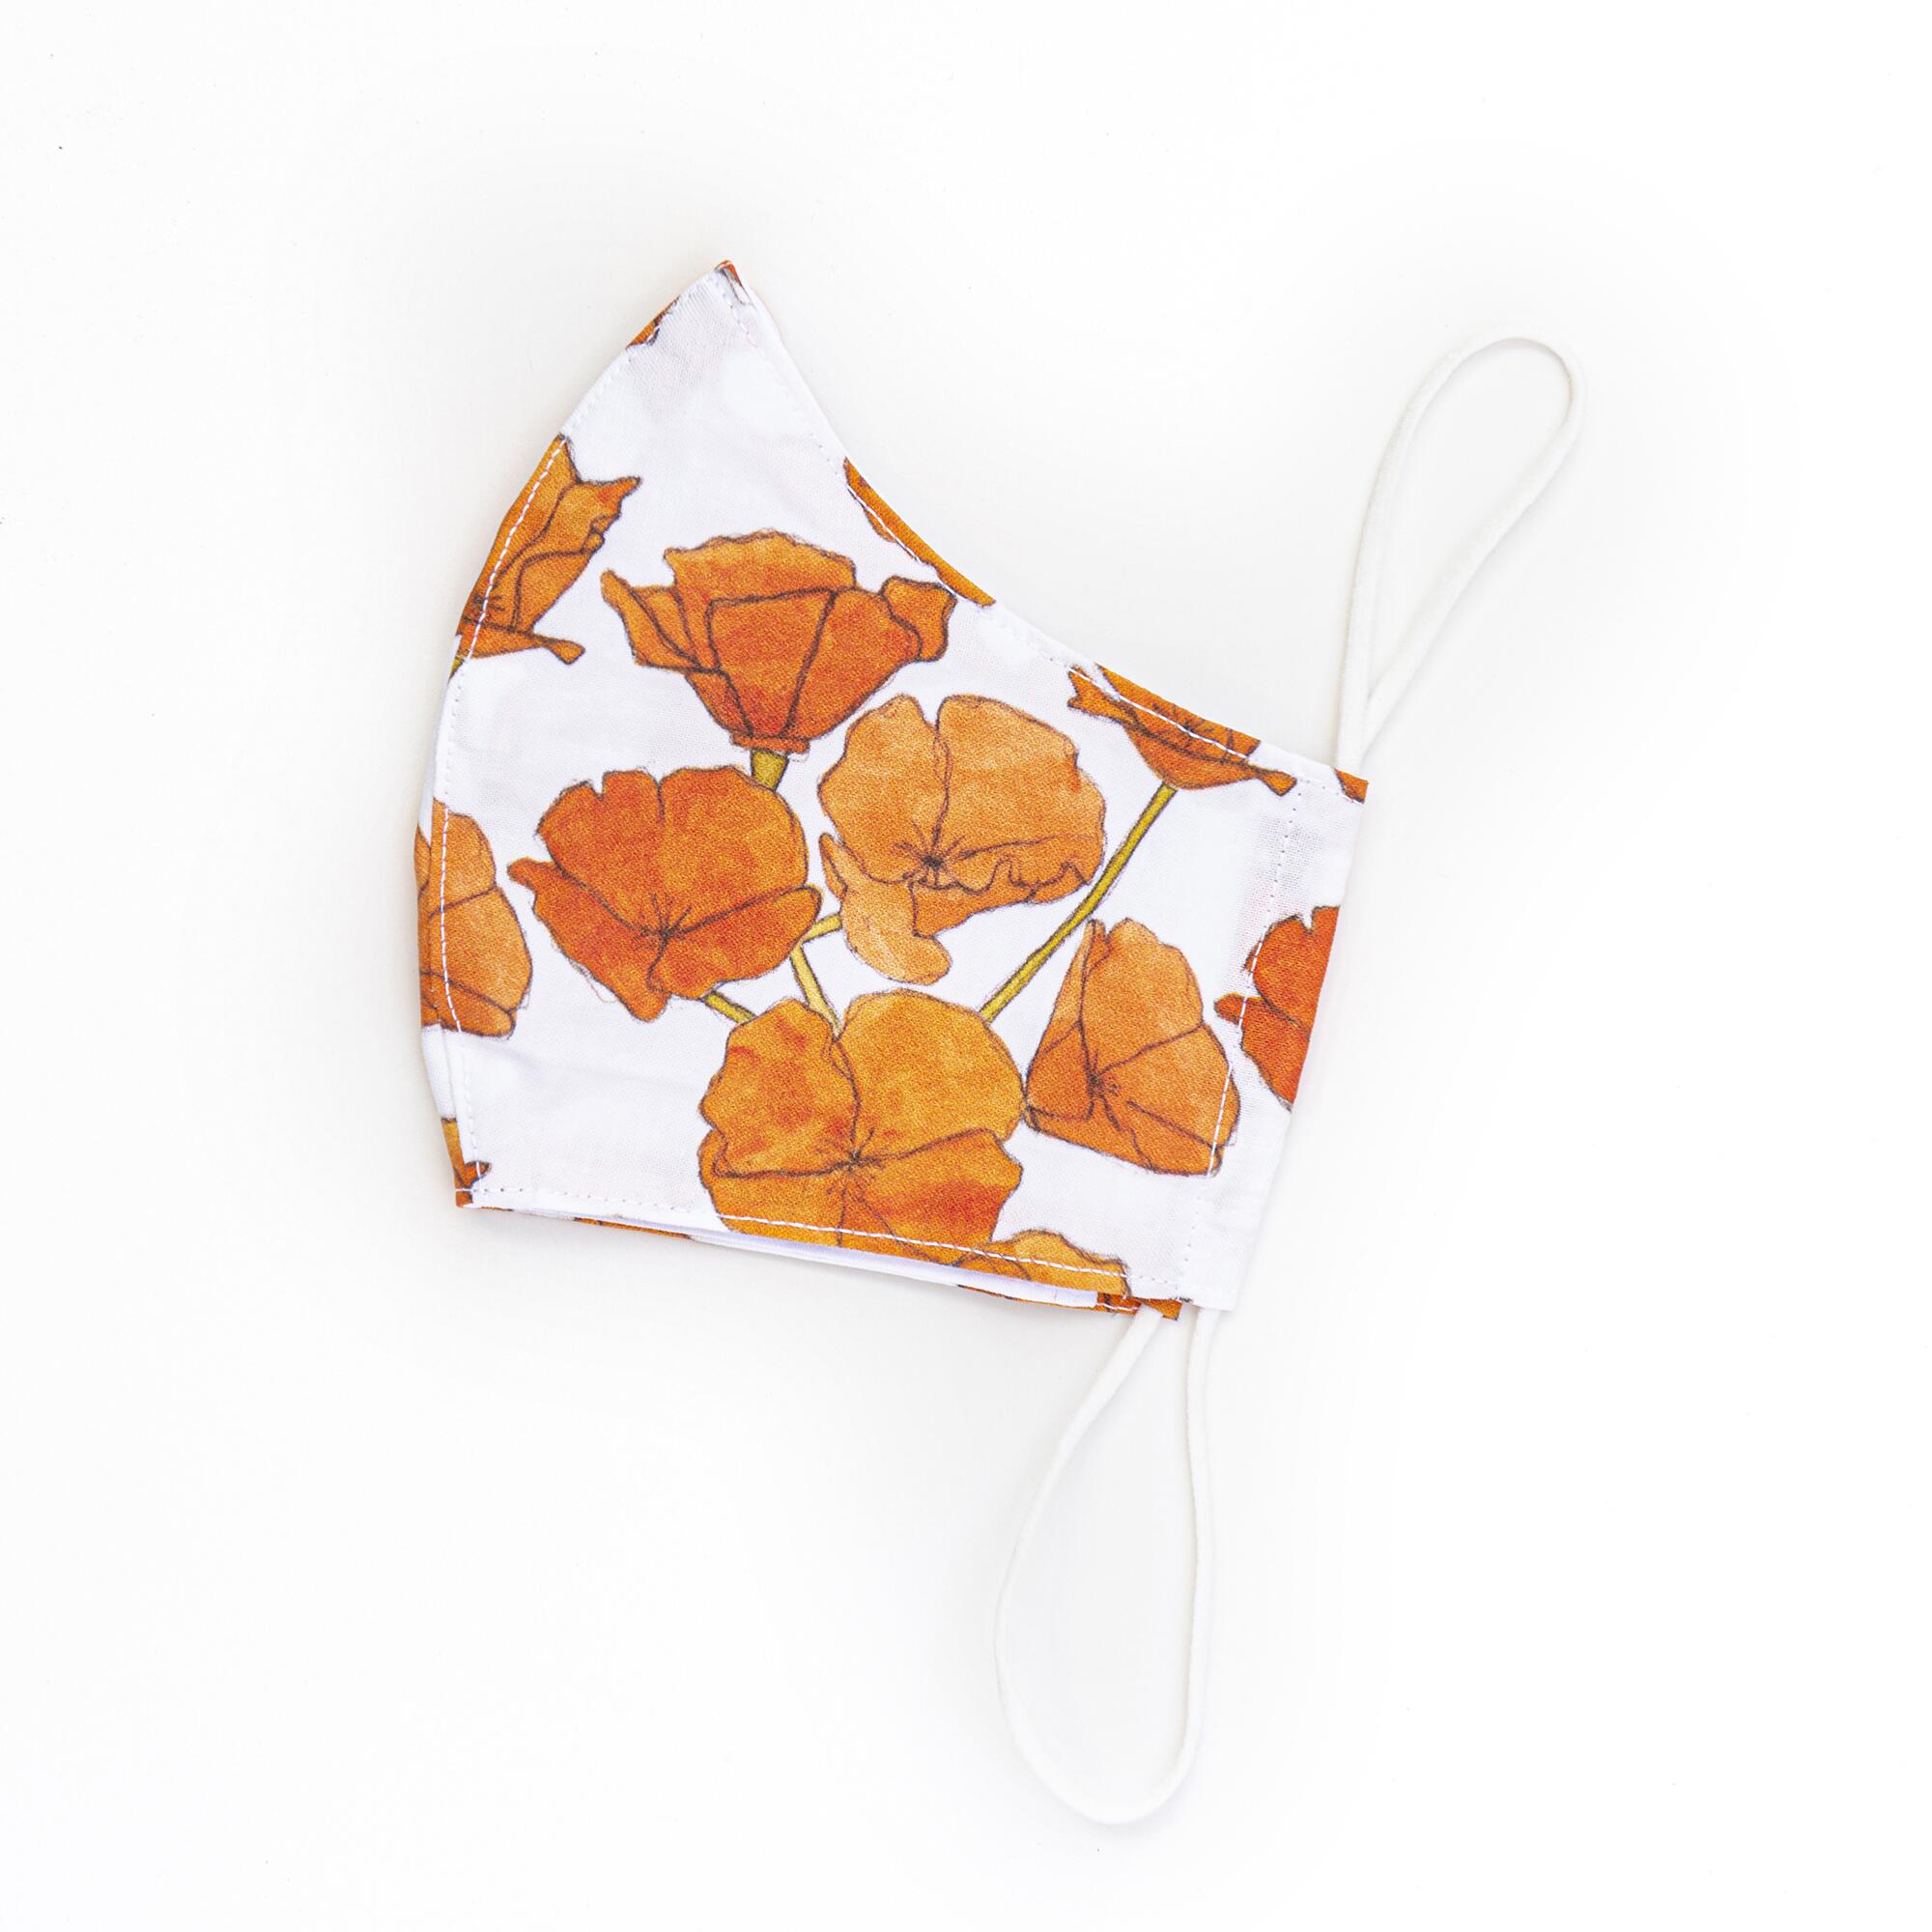 California Poppy face mask from Theodore Payne Foundation Store.